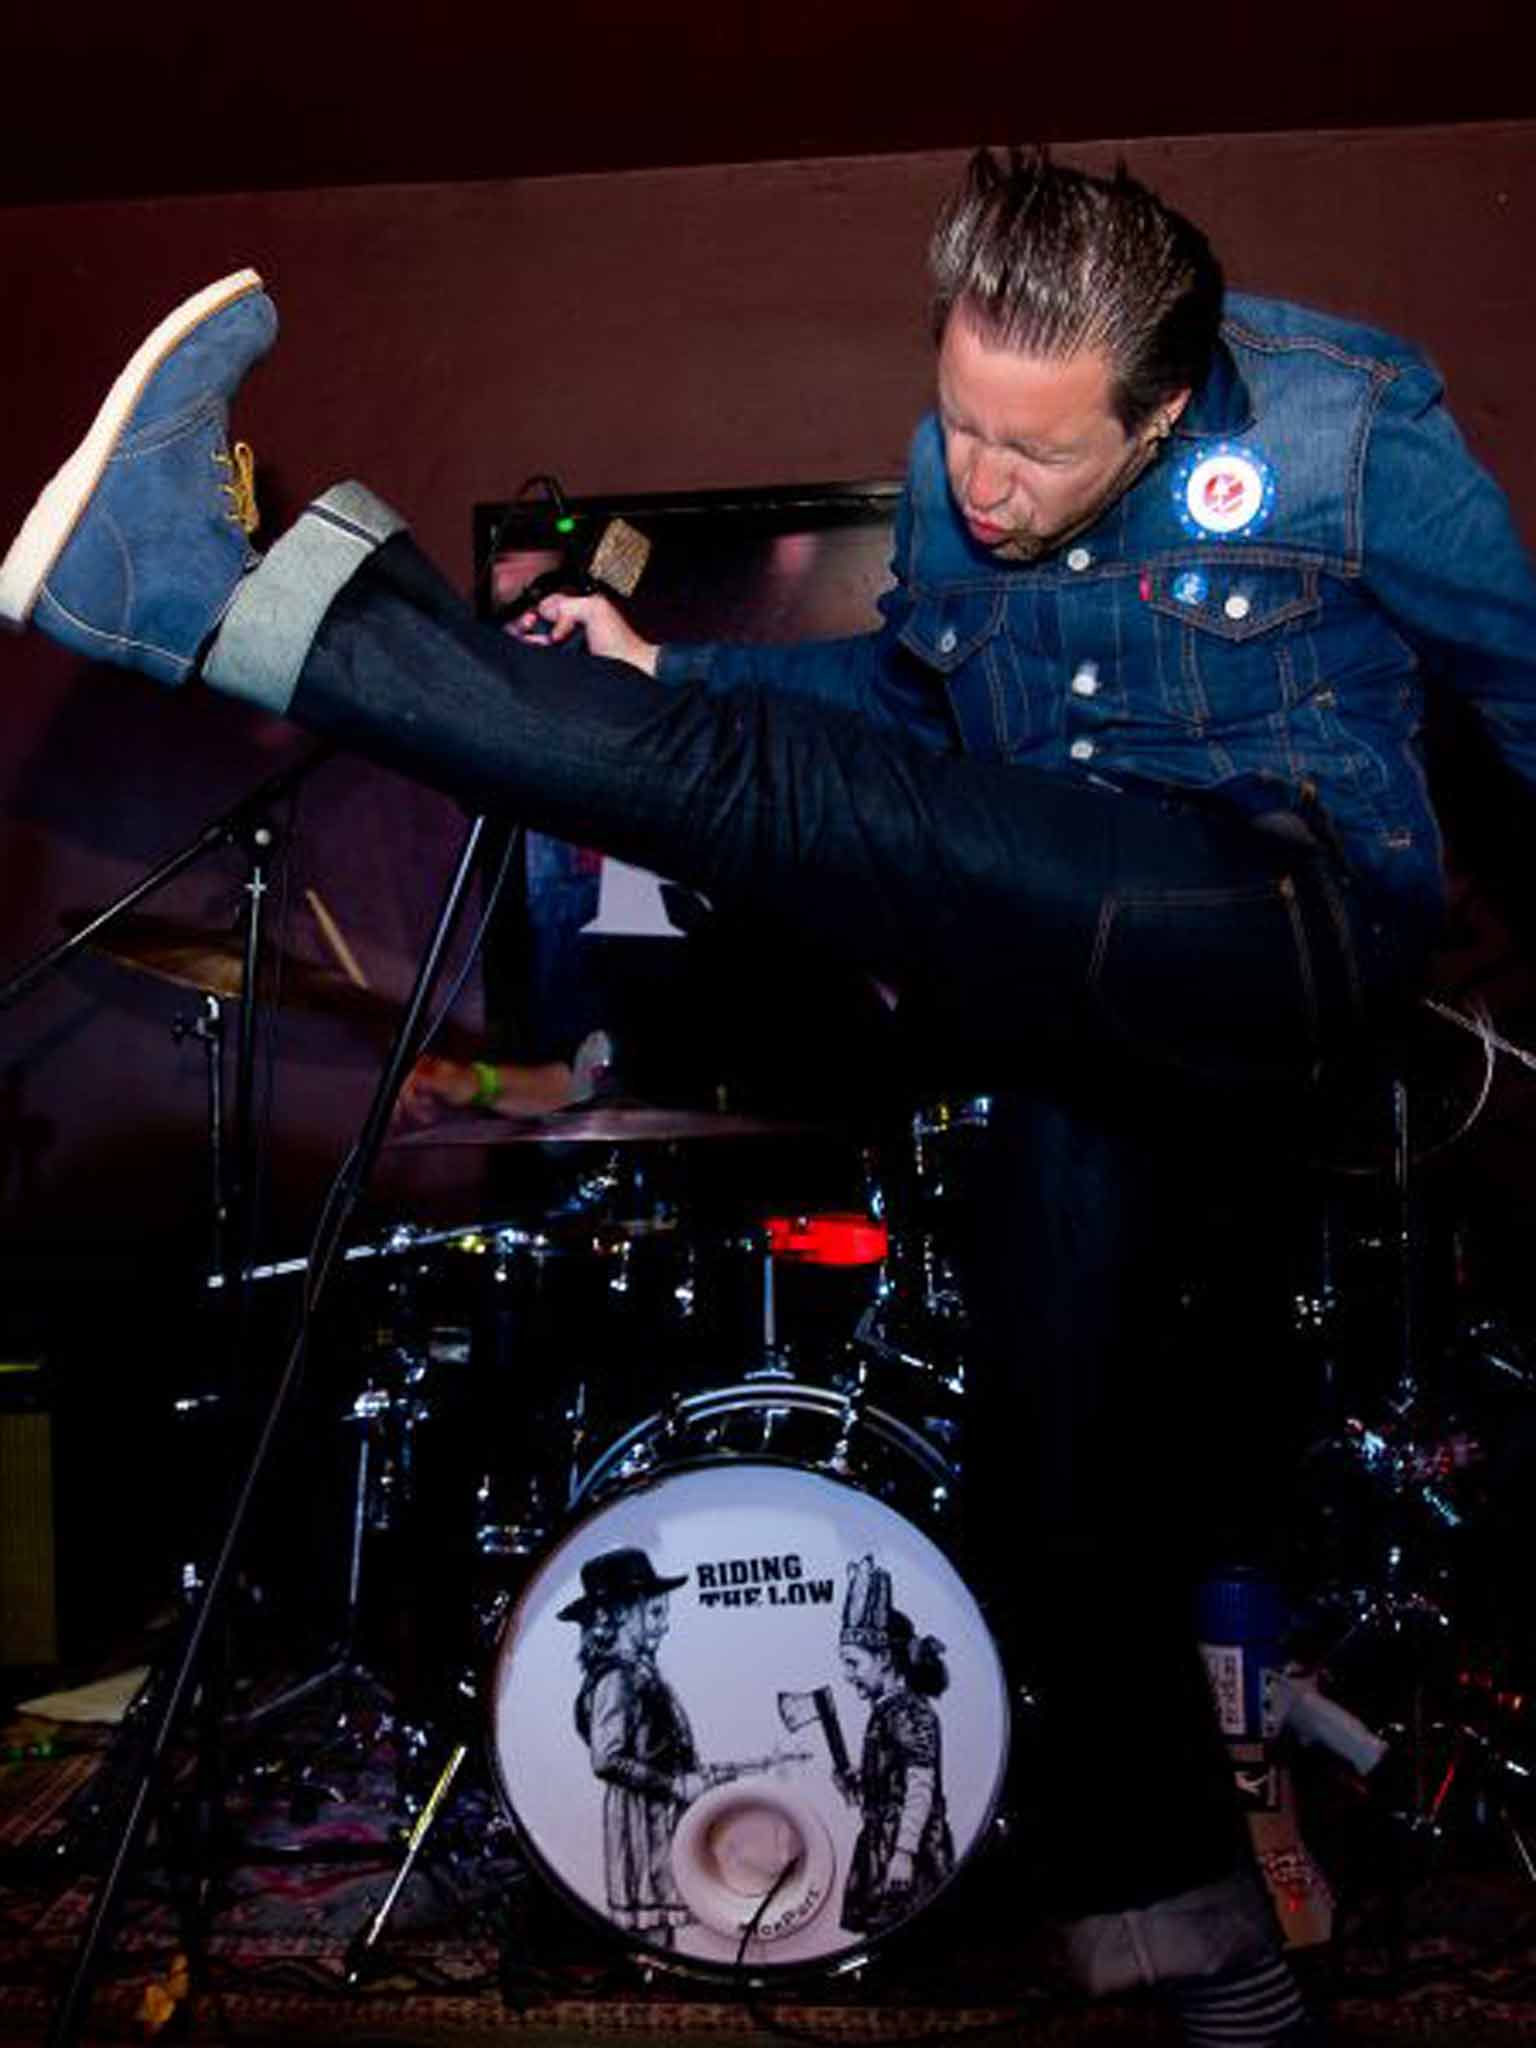 Kick it in: Paddy Considine on stage with Riding the Low in 2013